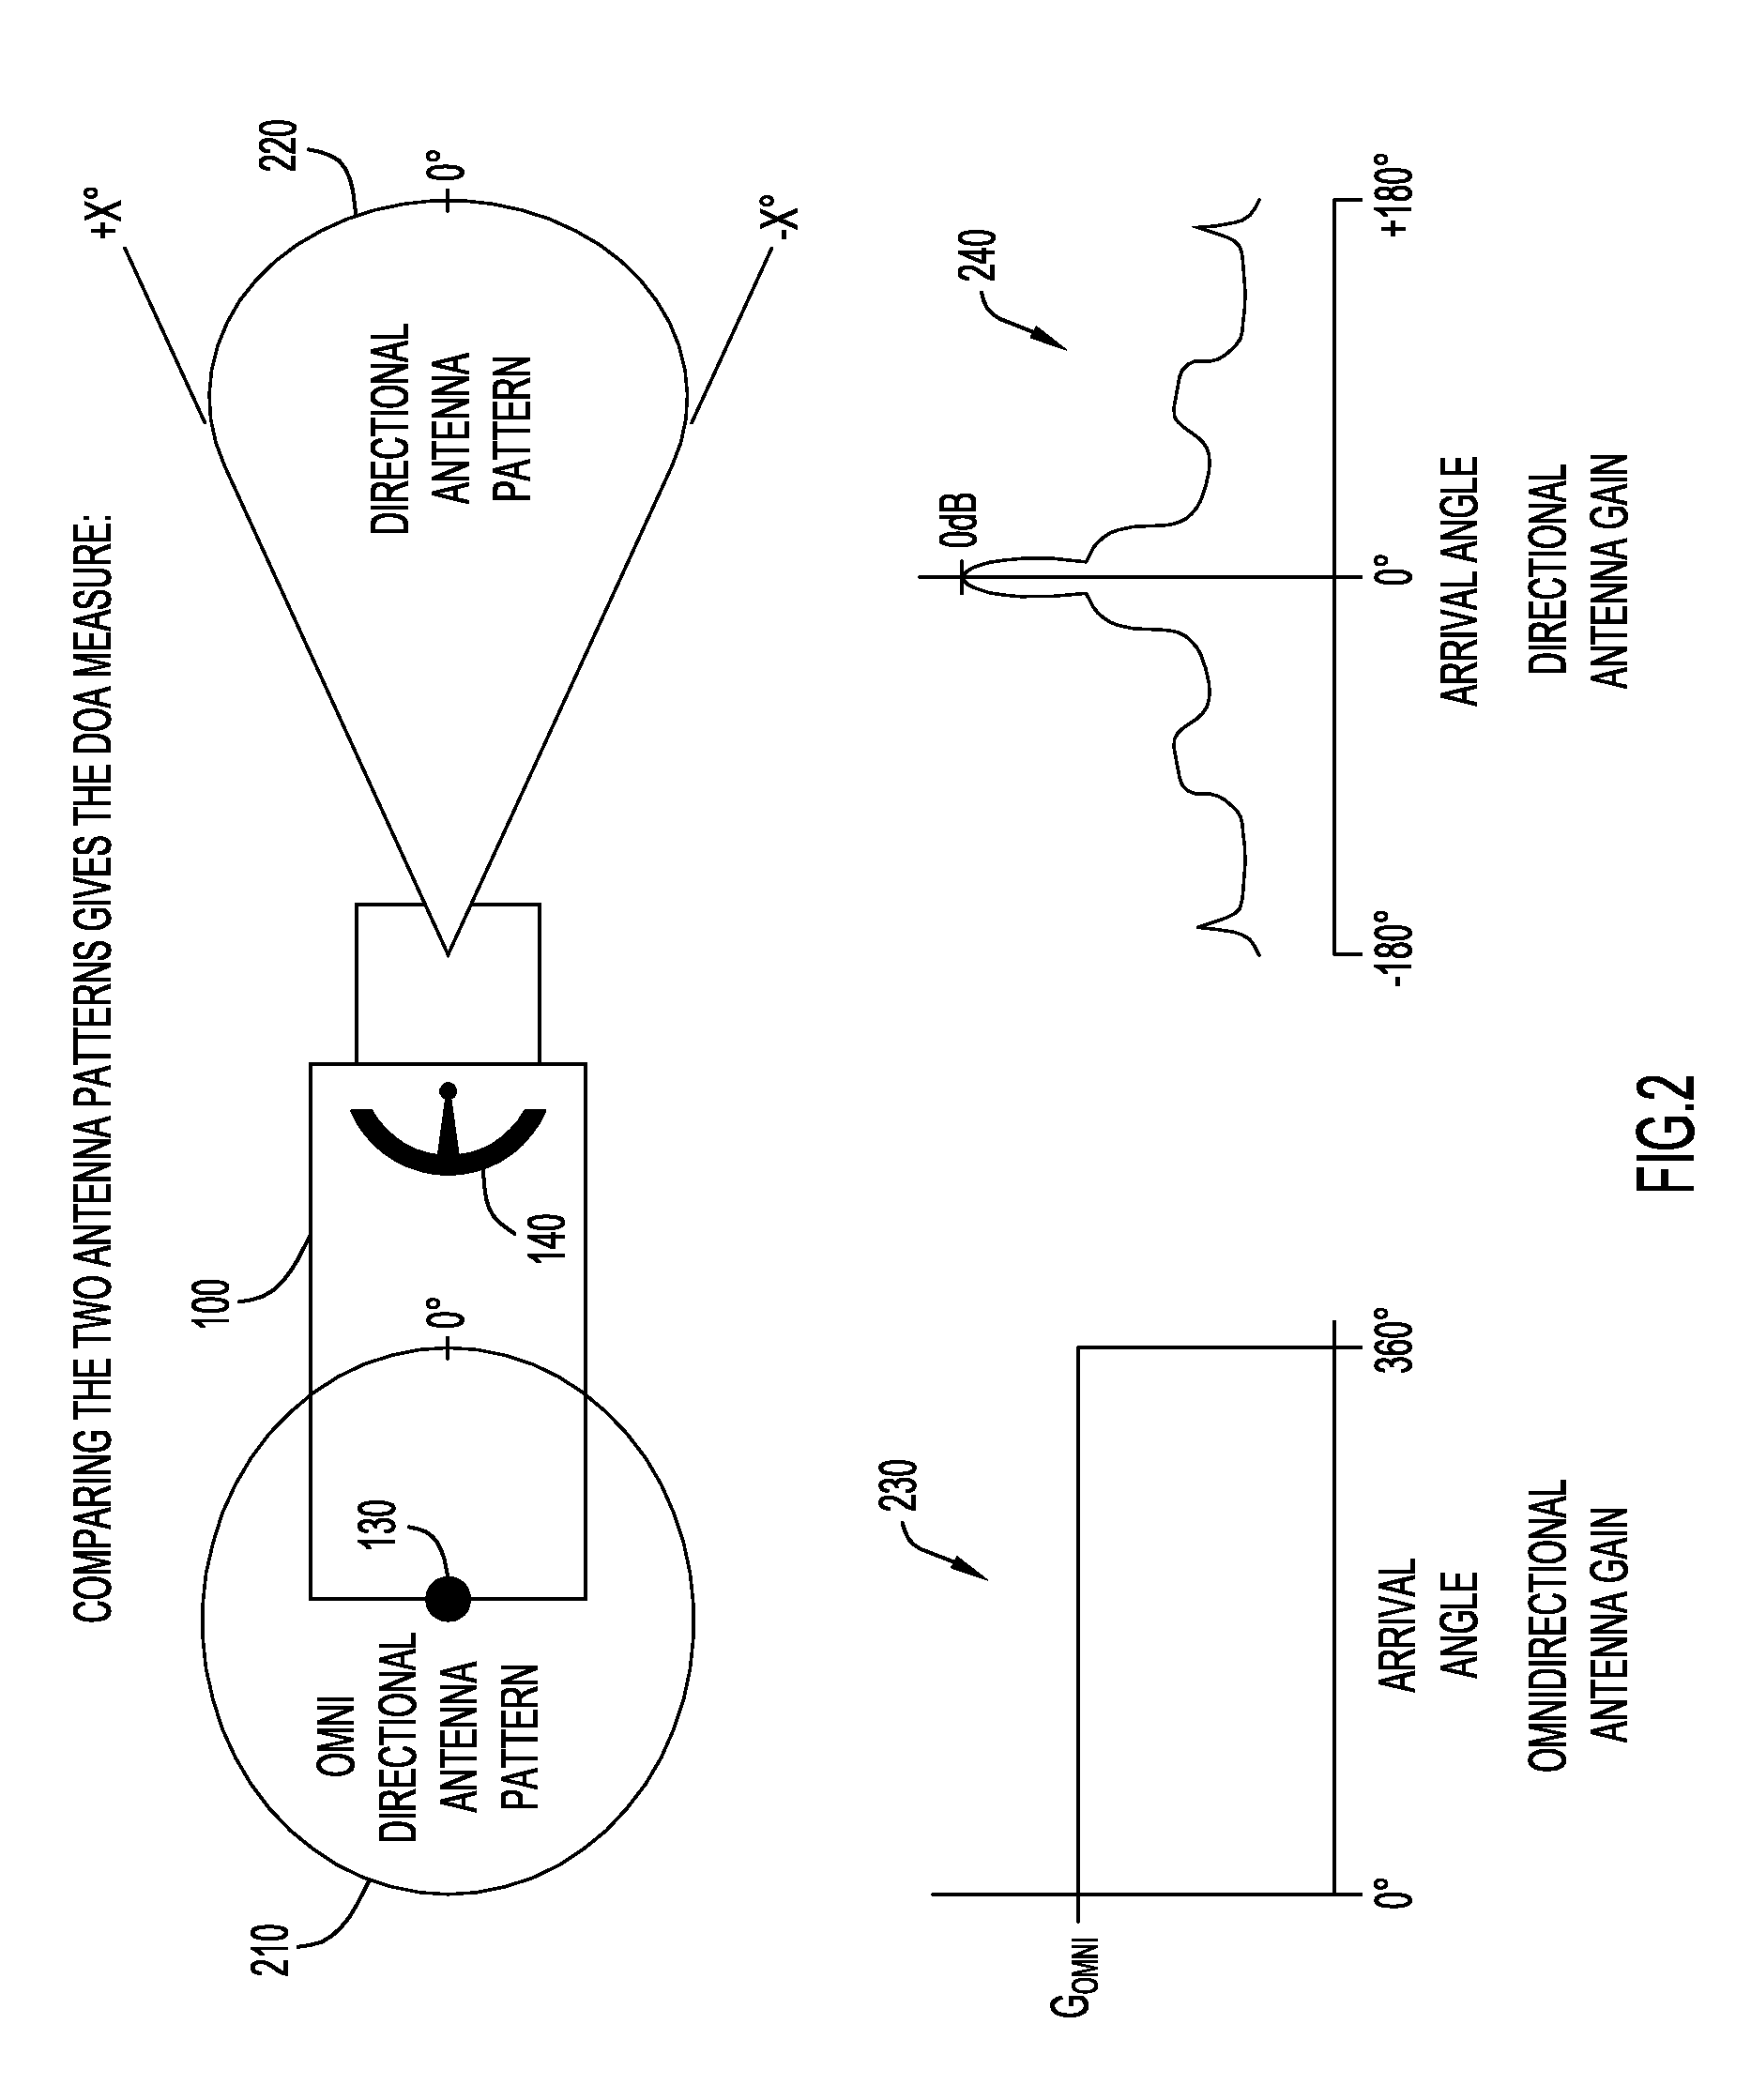 System and method for direction finding and geolocation of emitters based on line-of-bearing intersections